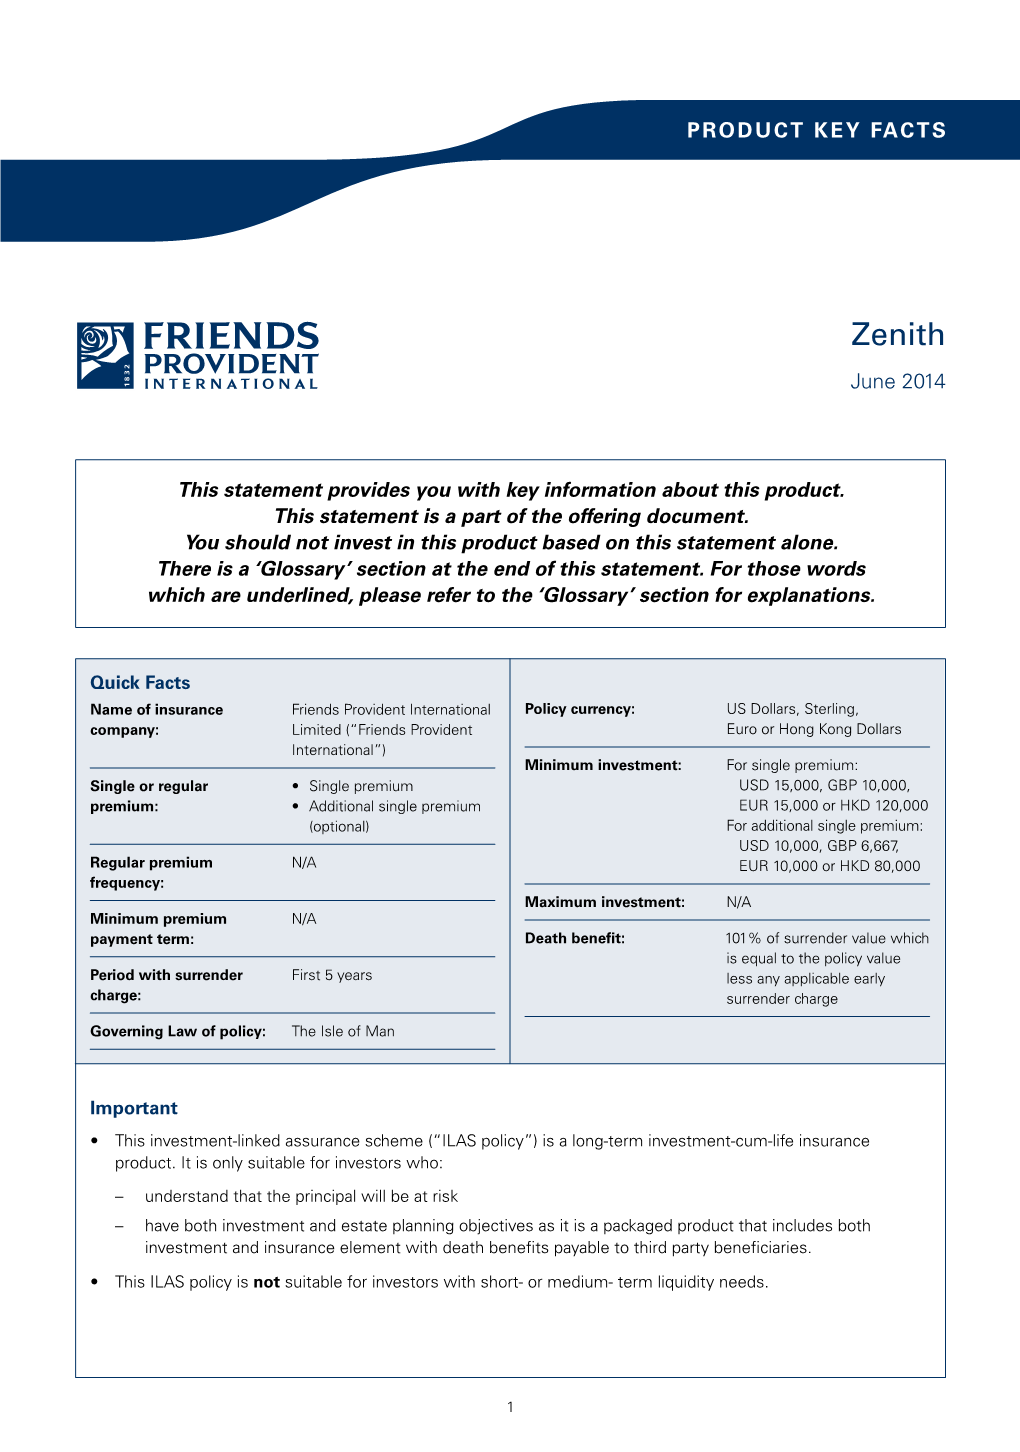 Friends Provident International Zenith Product Key Facts